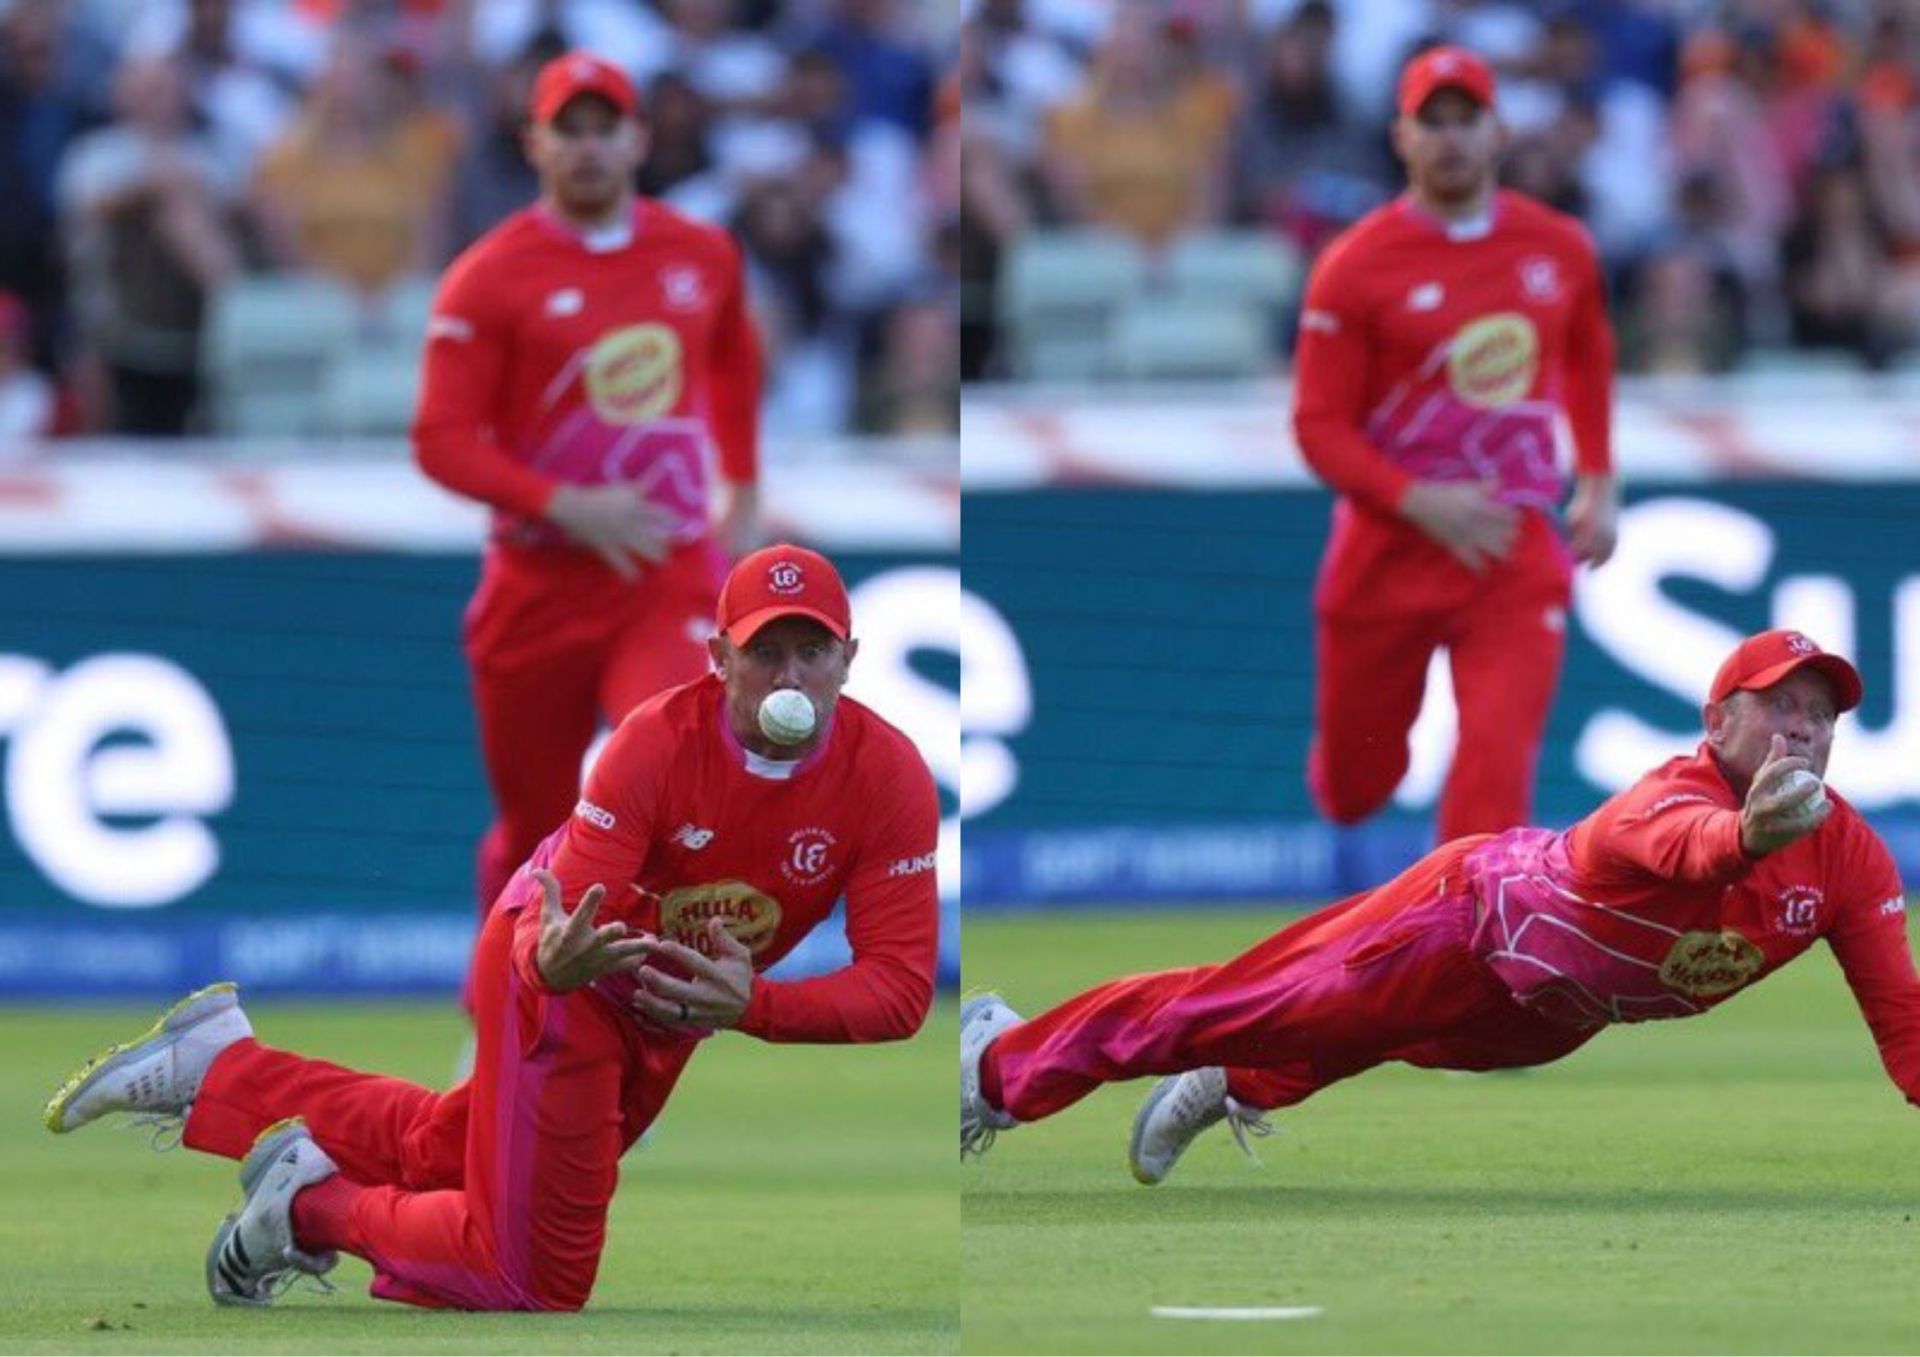 Roelof van der Merwe pulled off a superb catch in The Hundred on Thursday (Picture Credits: The Hundred via Twitter).